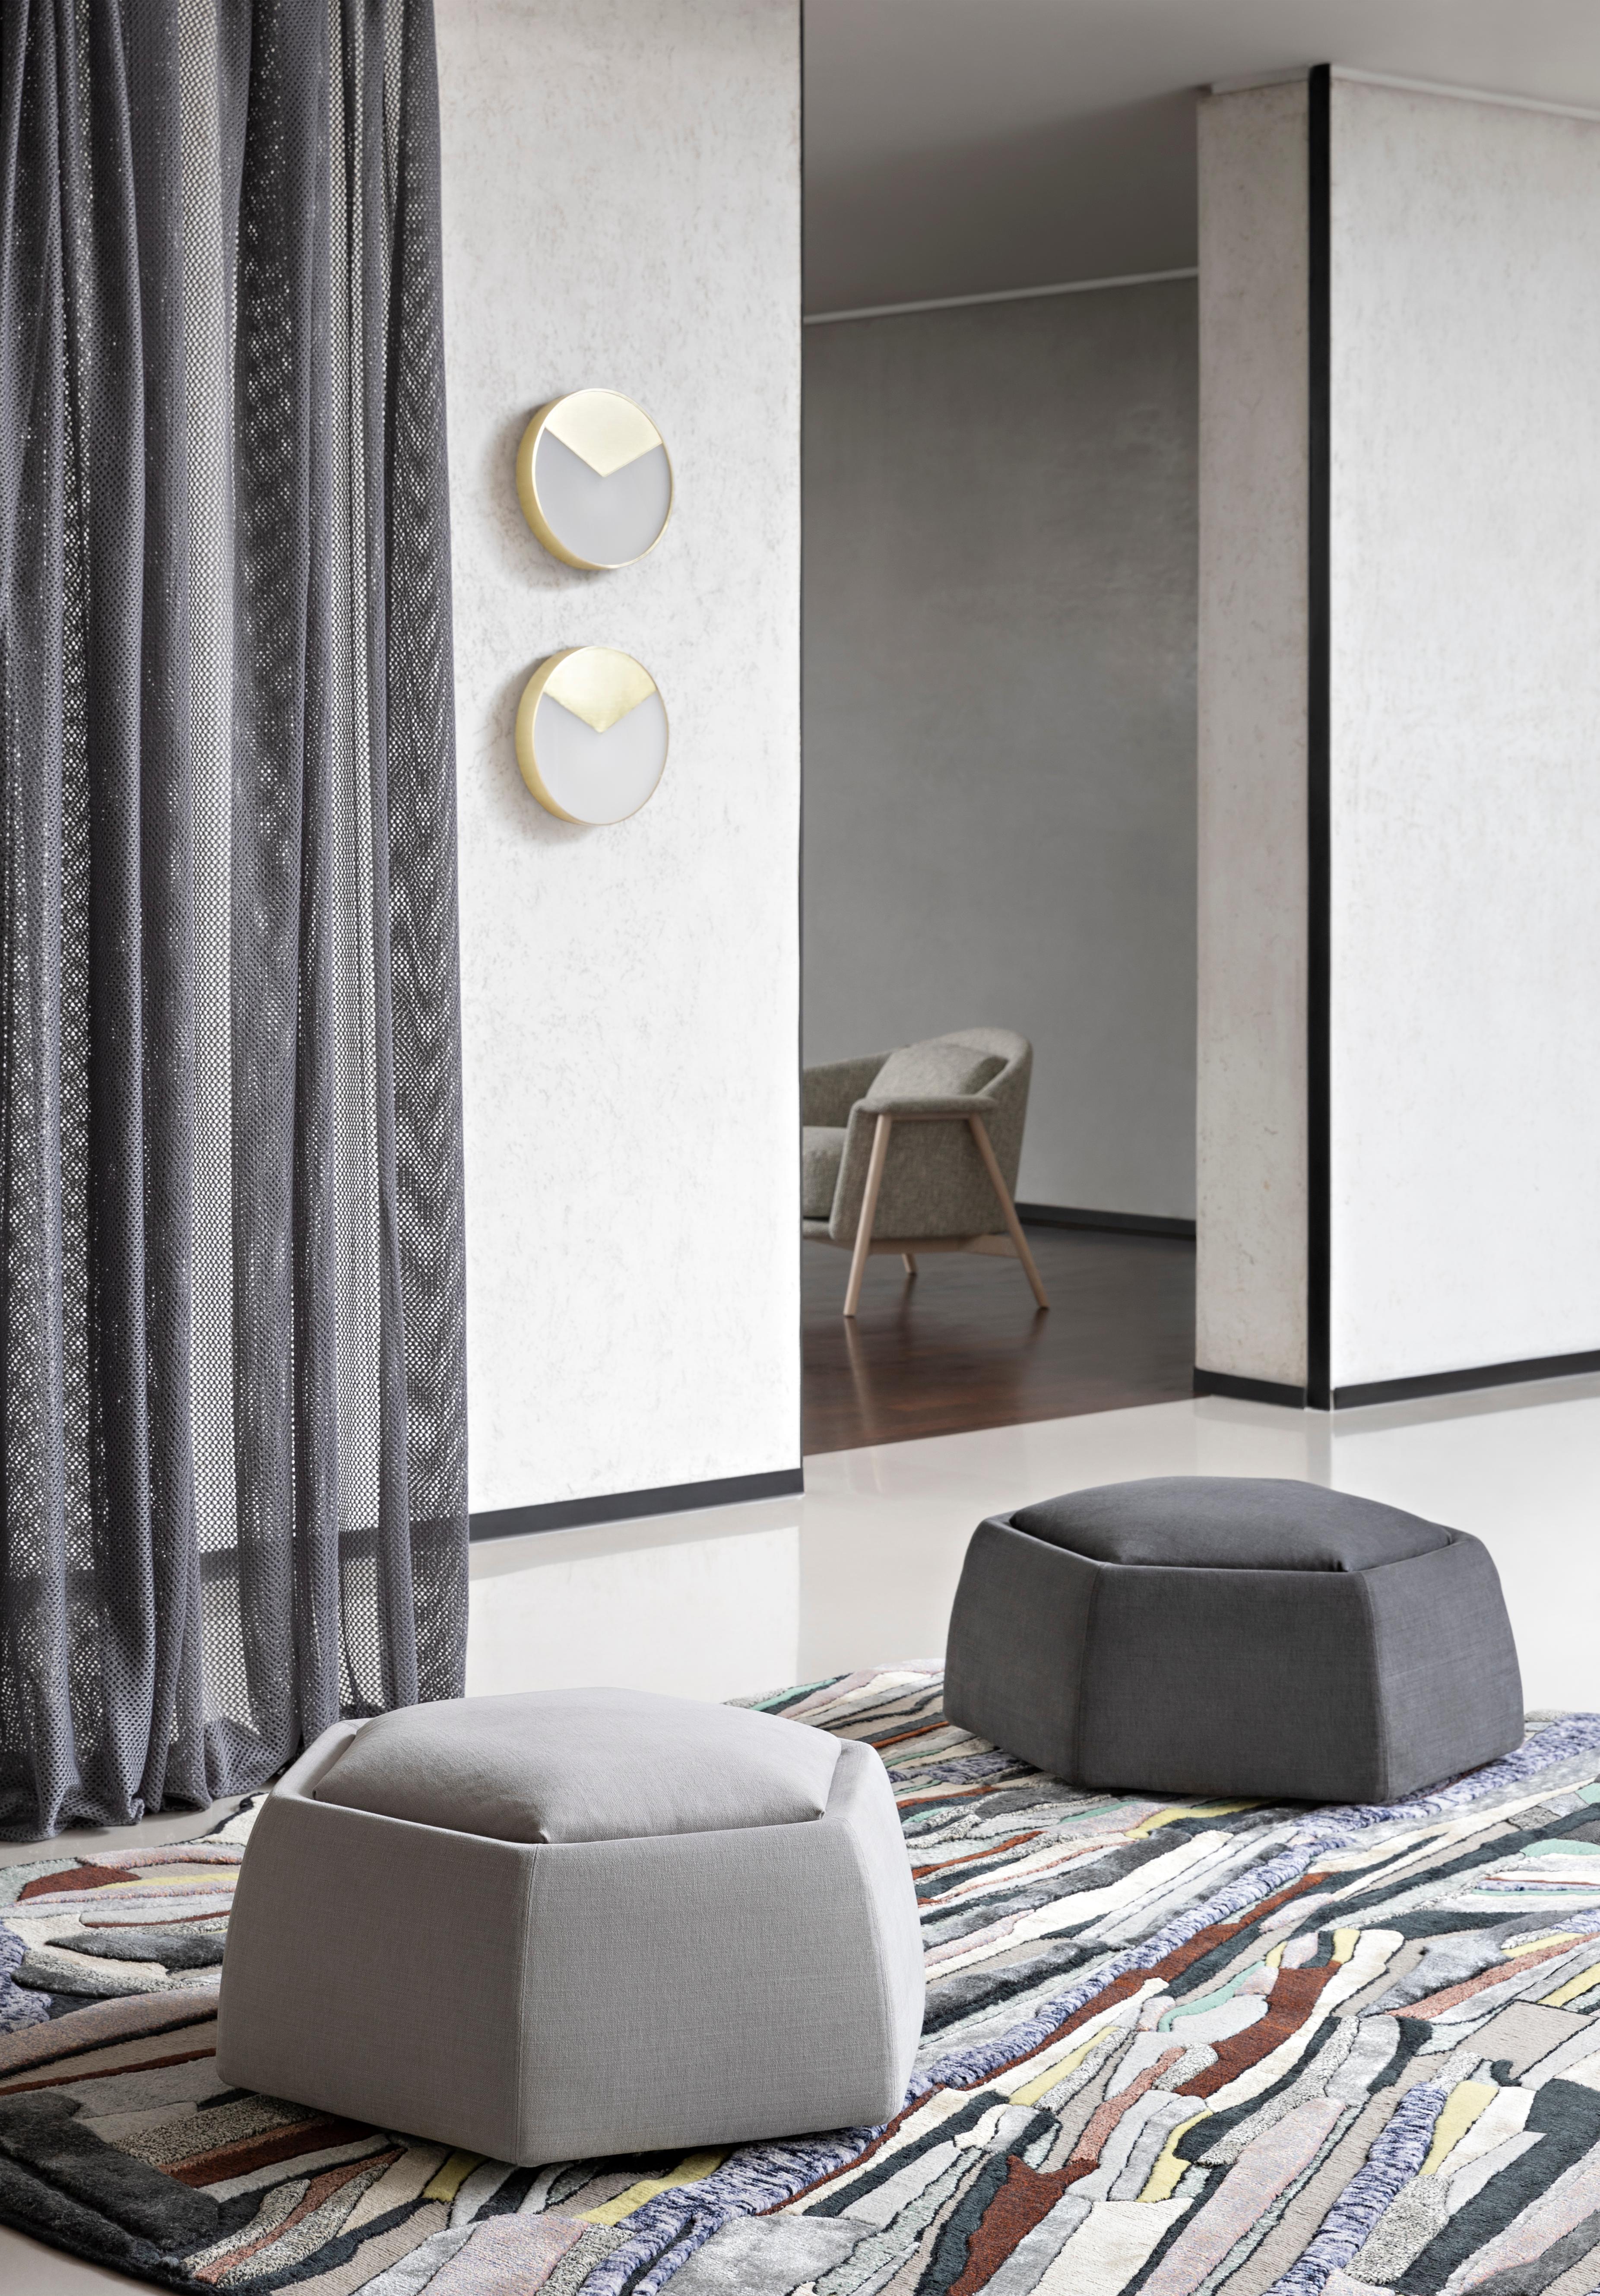 Eclectic by nature, the Honey pouf appears to be a small hexagonal cell that adapts to the needs of the moment. Honey features a seamless modular design, and the various elements can be attached and combined to form a veritable honeycomb. Honey is